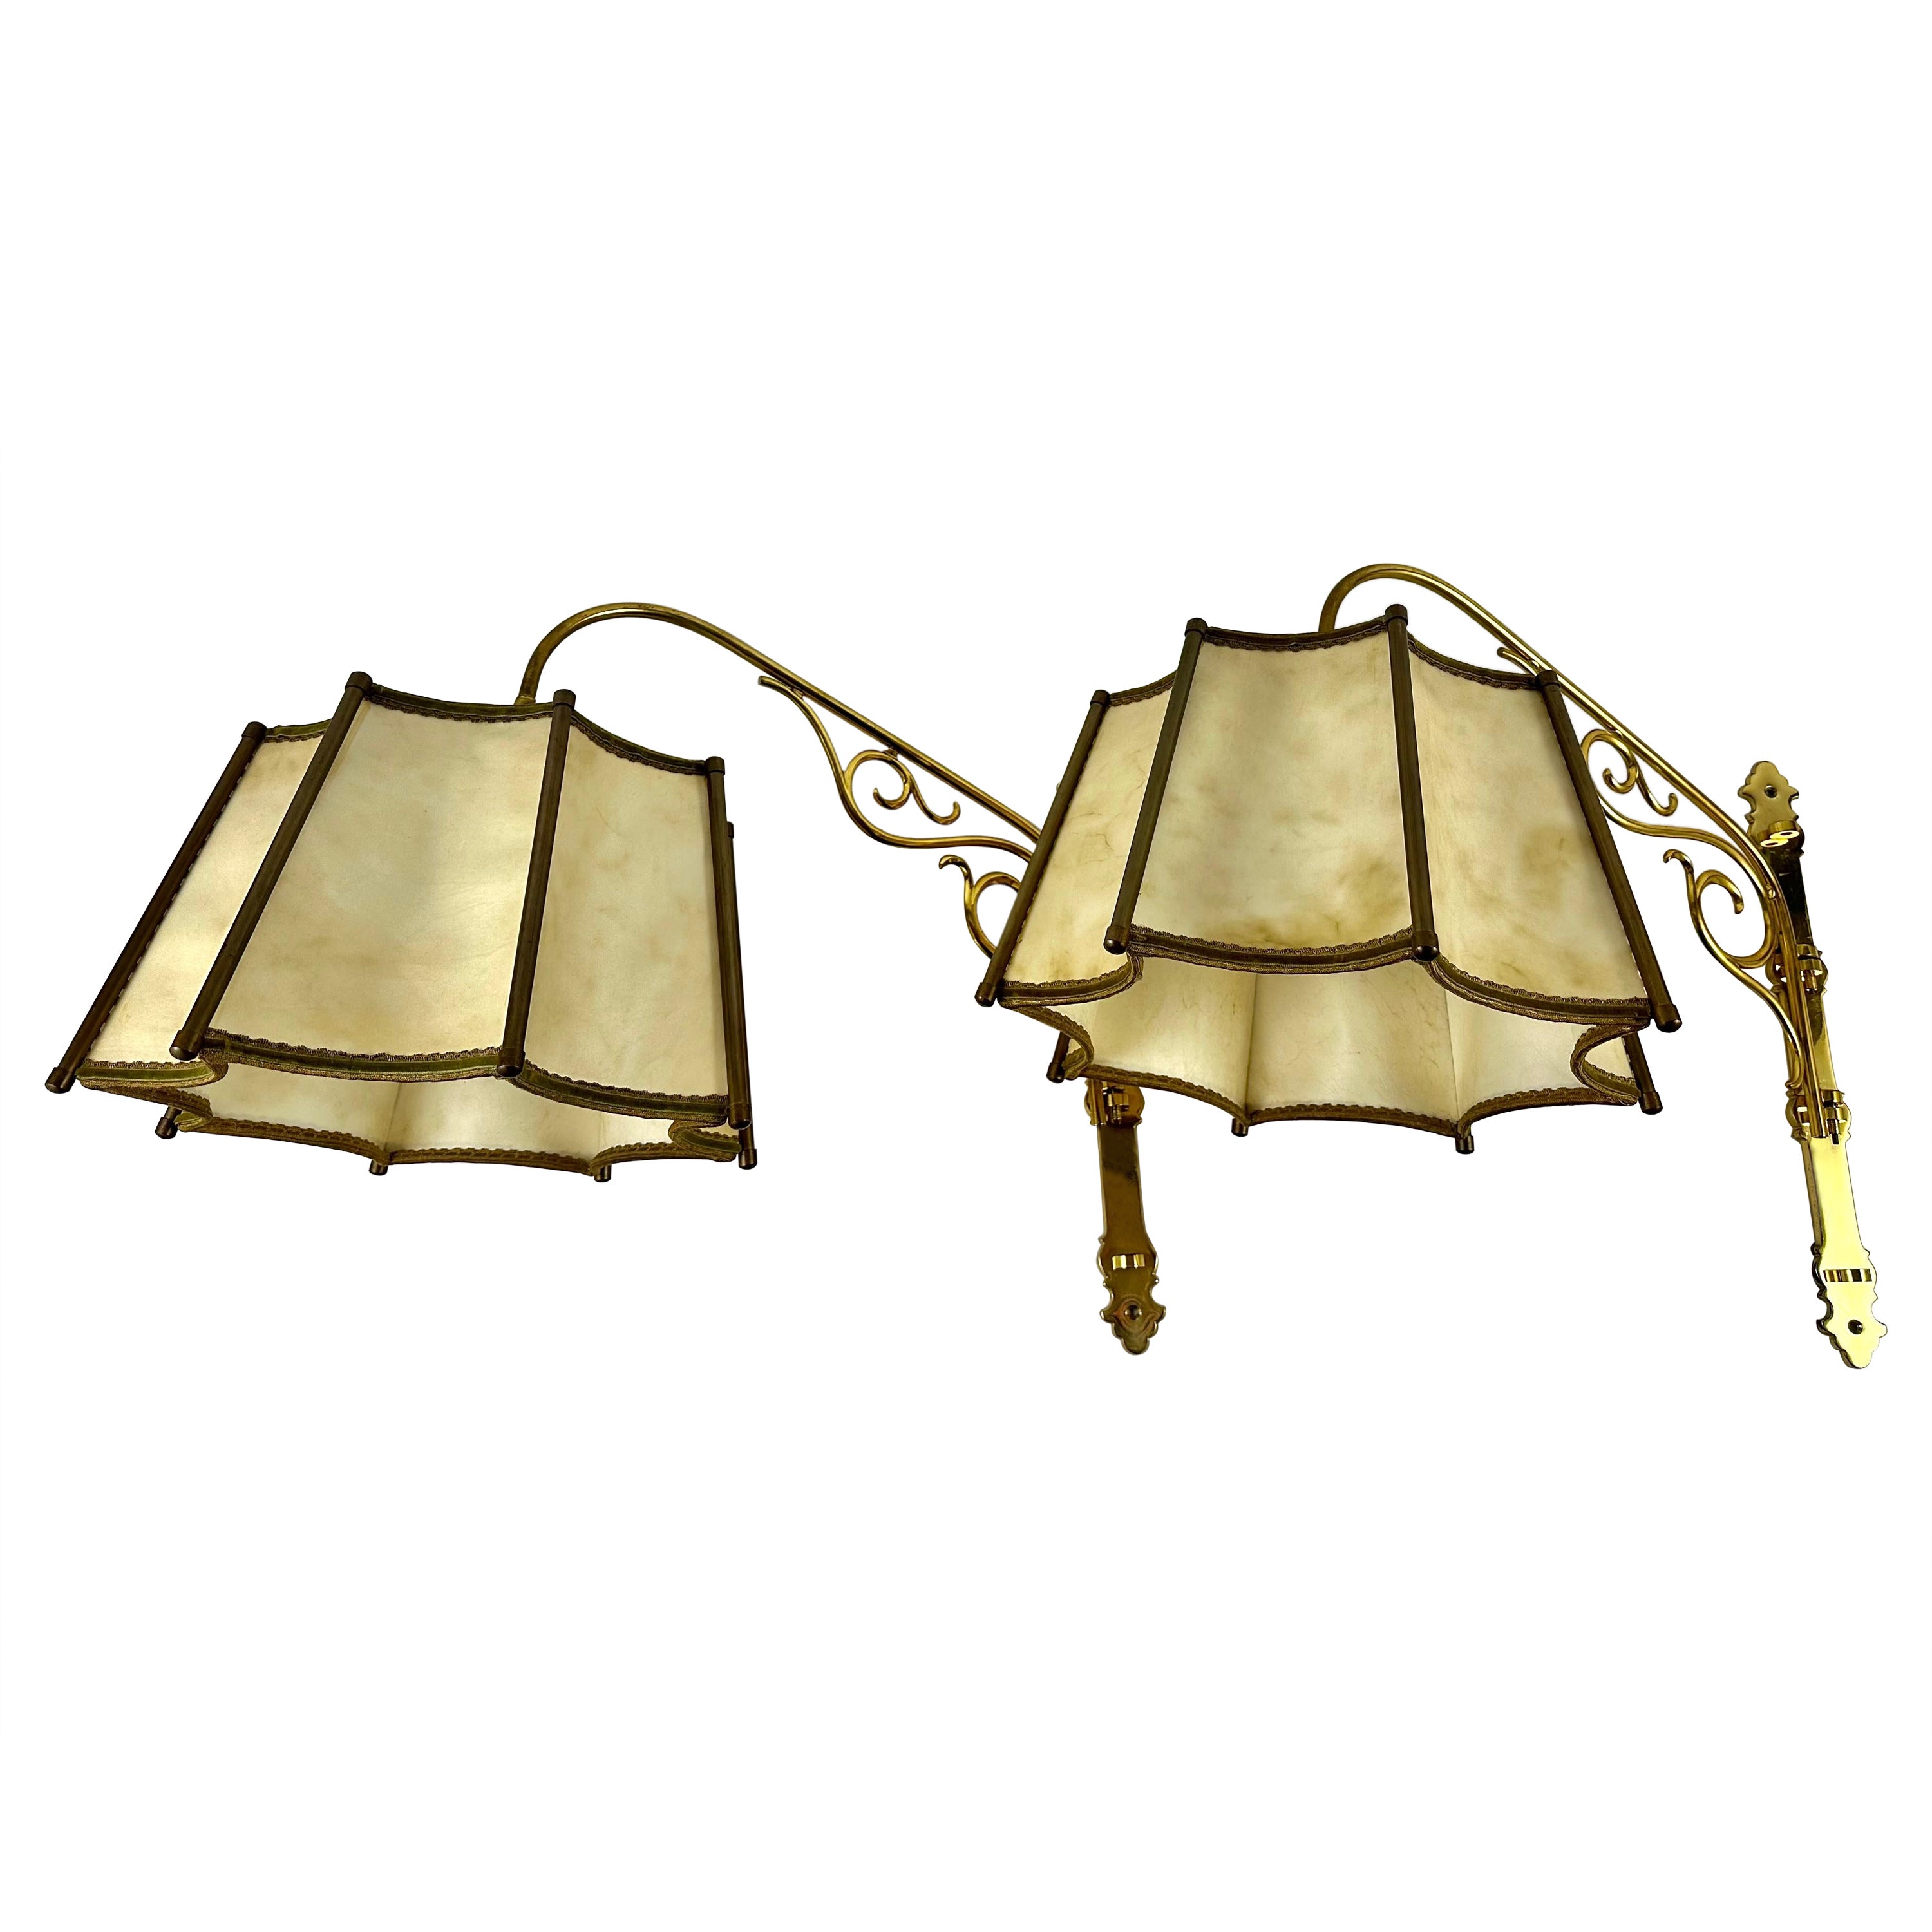 Vintage Wall Sconces With Leather Shade Bedside Lighting, Set 2, Germany, 1950s